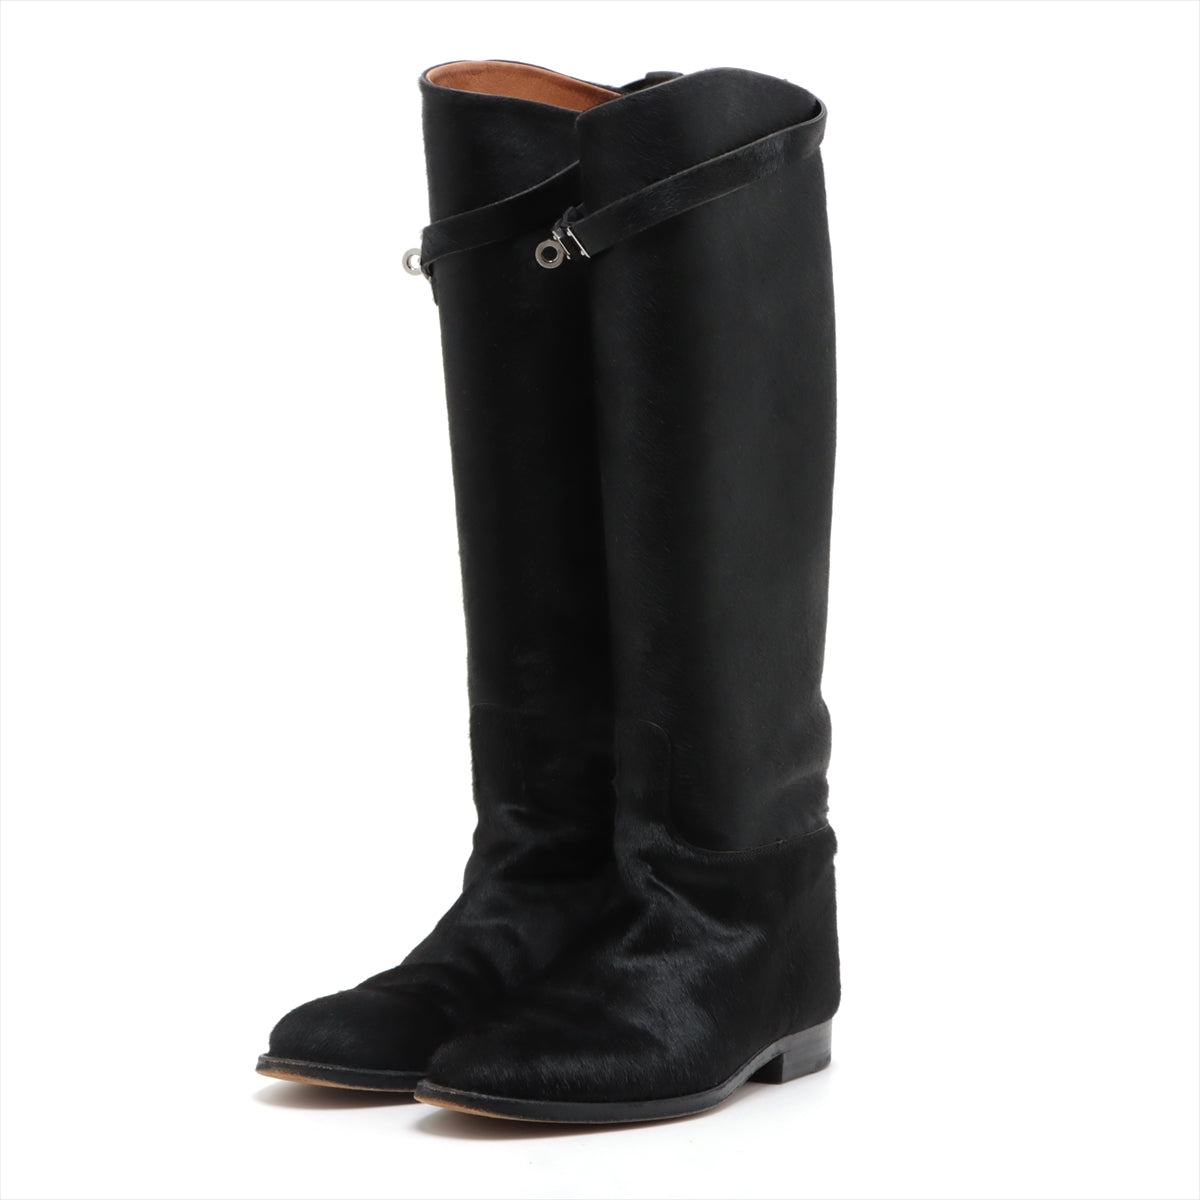 Hermès Leather & unborn calf Long boots 37 Ladies' Black jumping Kelly metal fittings Has a star mark Sold goods